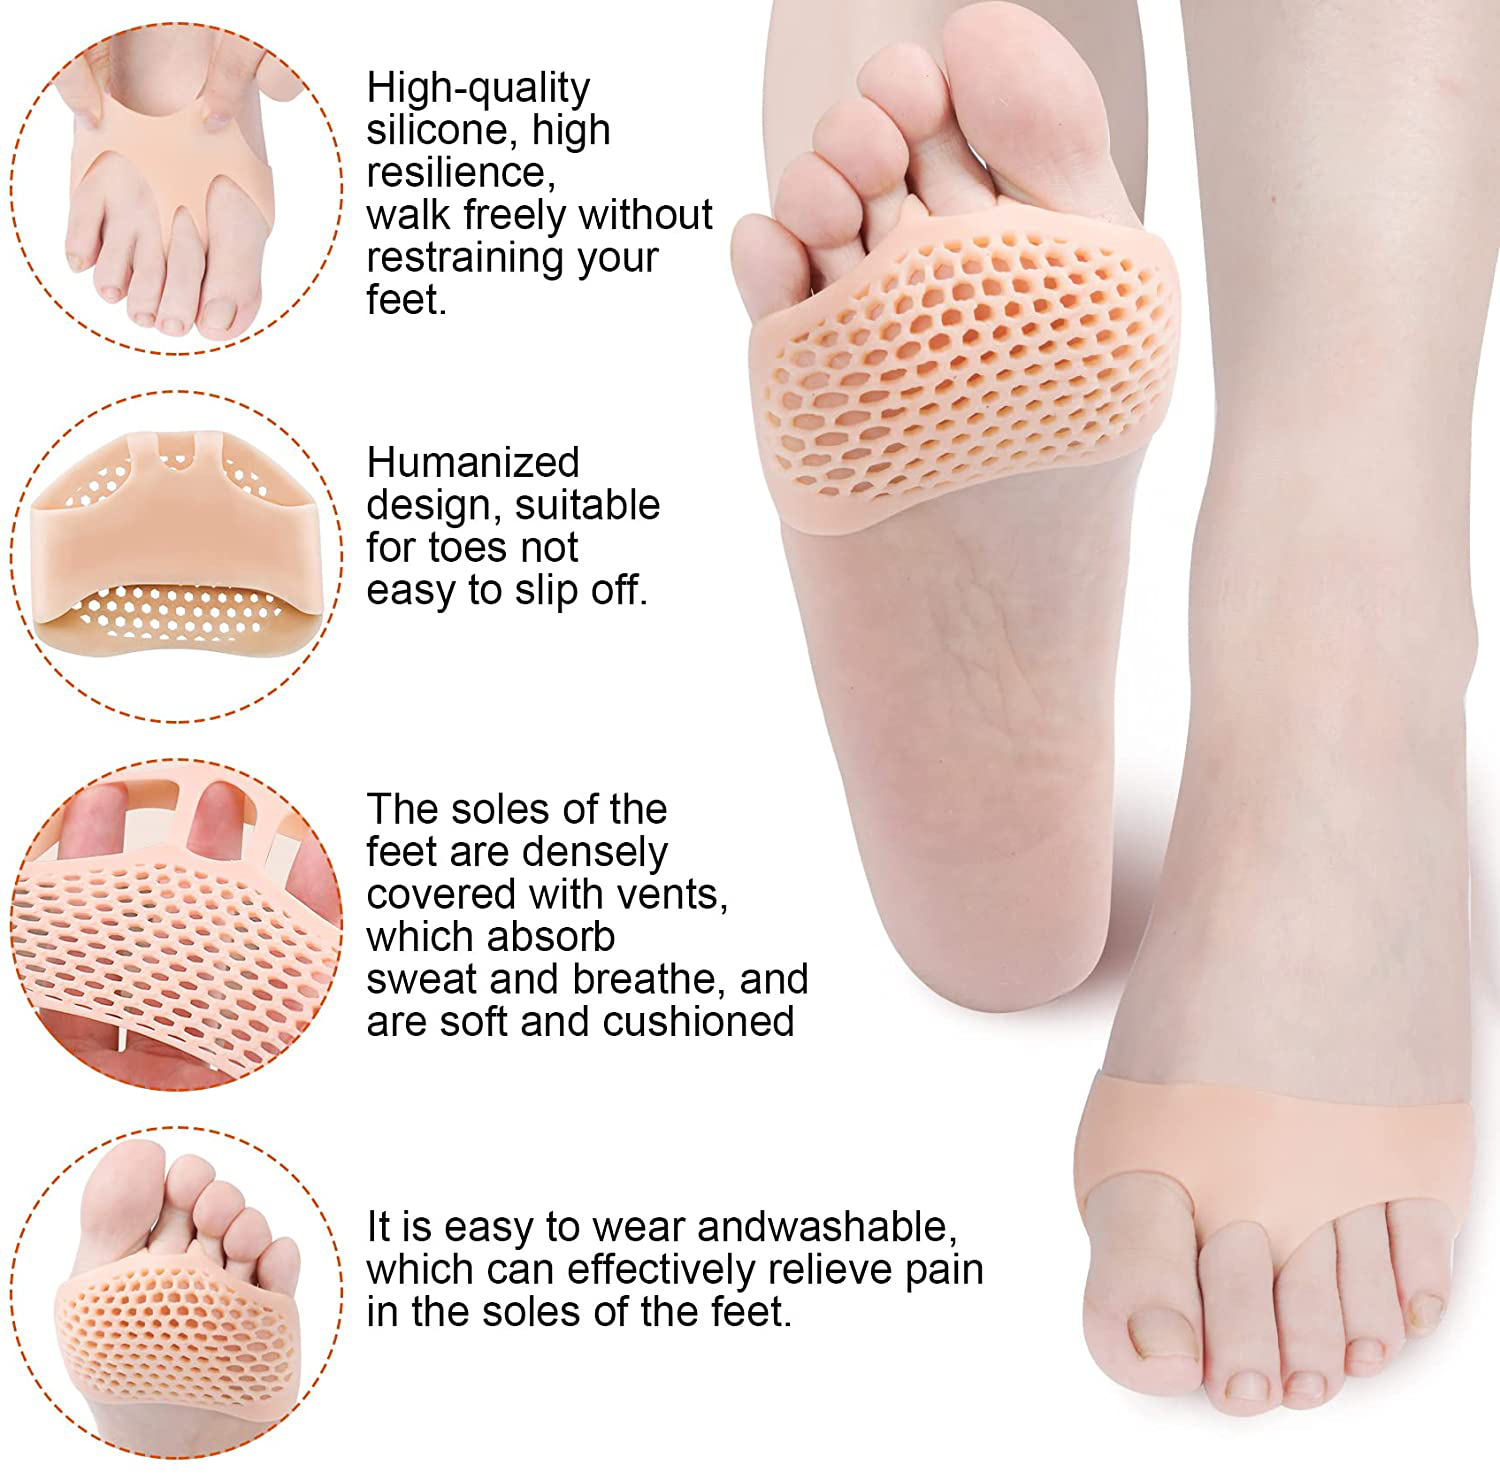 PAGOW 10 Pairs Metatarsal Foot Pads for Women and Men, Soft Silicone Forefoot Pad, Pain Relief Honeycomb Ball of Foot Cushion for Sports Shoes, High Heels, Boots, Canvas Shoes